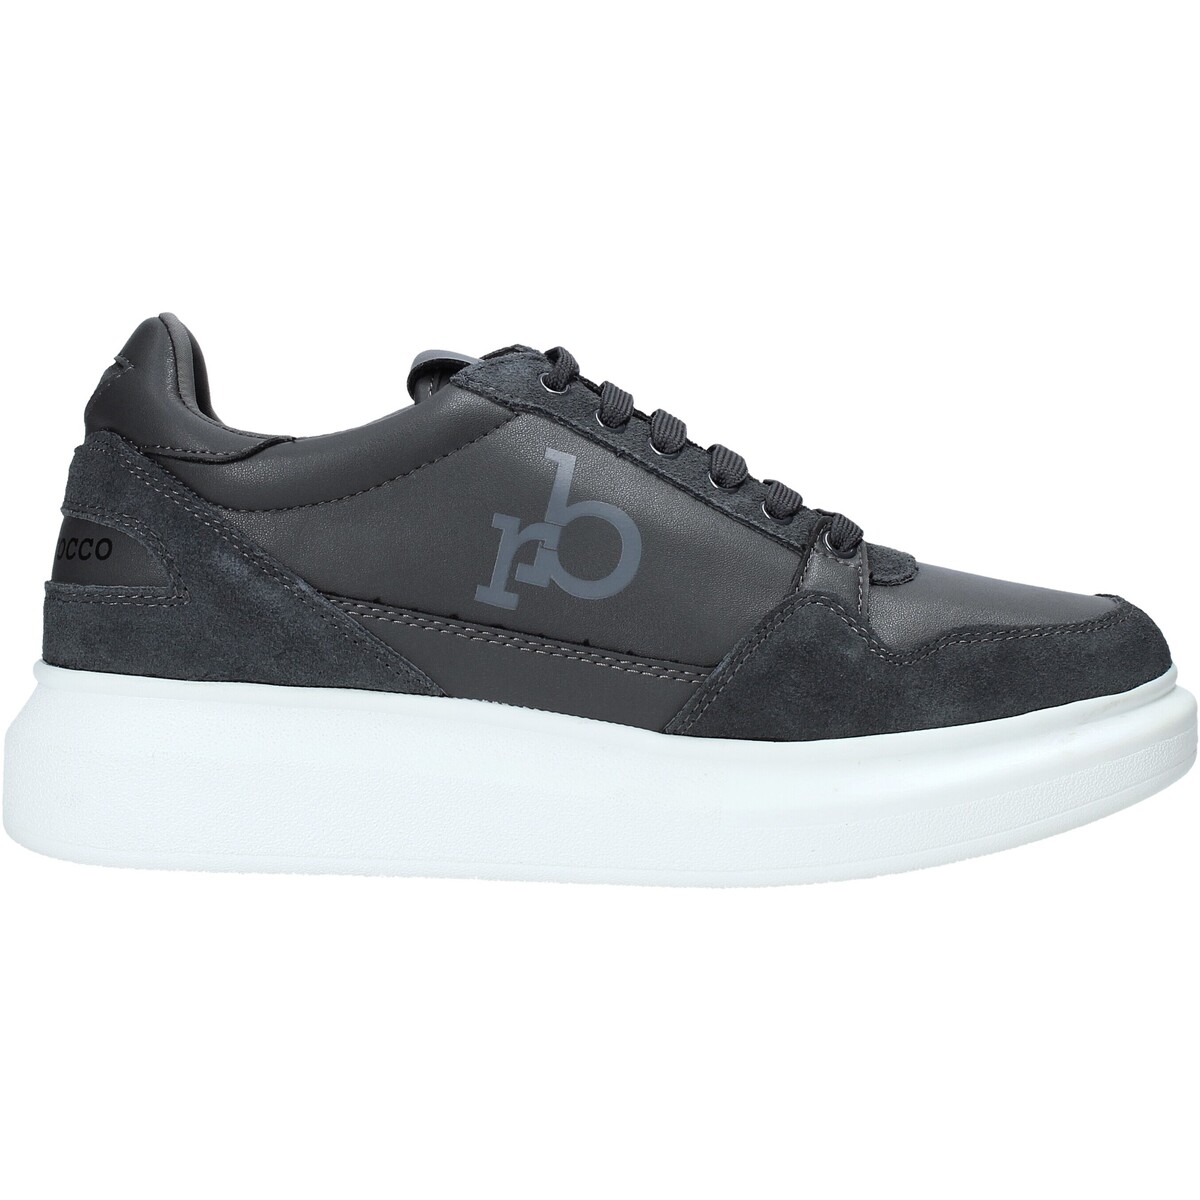 Xαμηλά Sneakers Rocco Barocco RBR-48.2